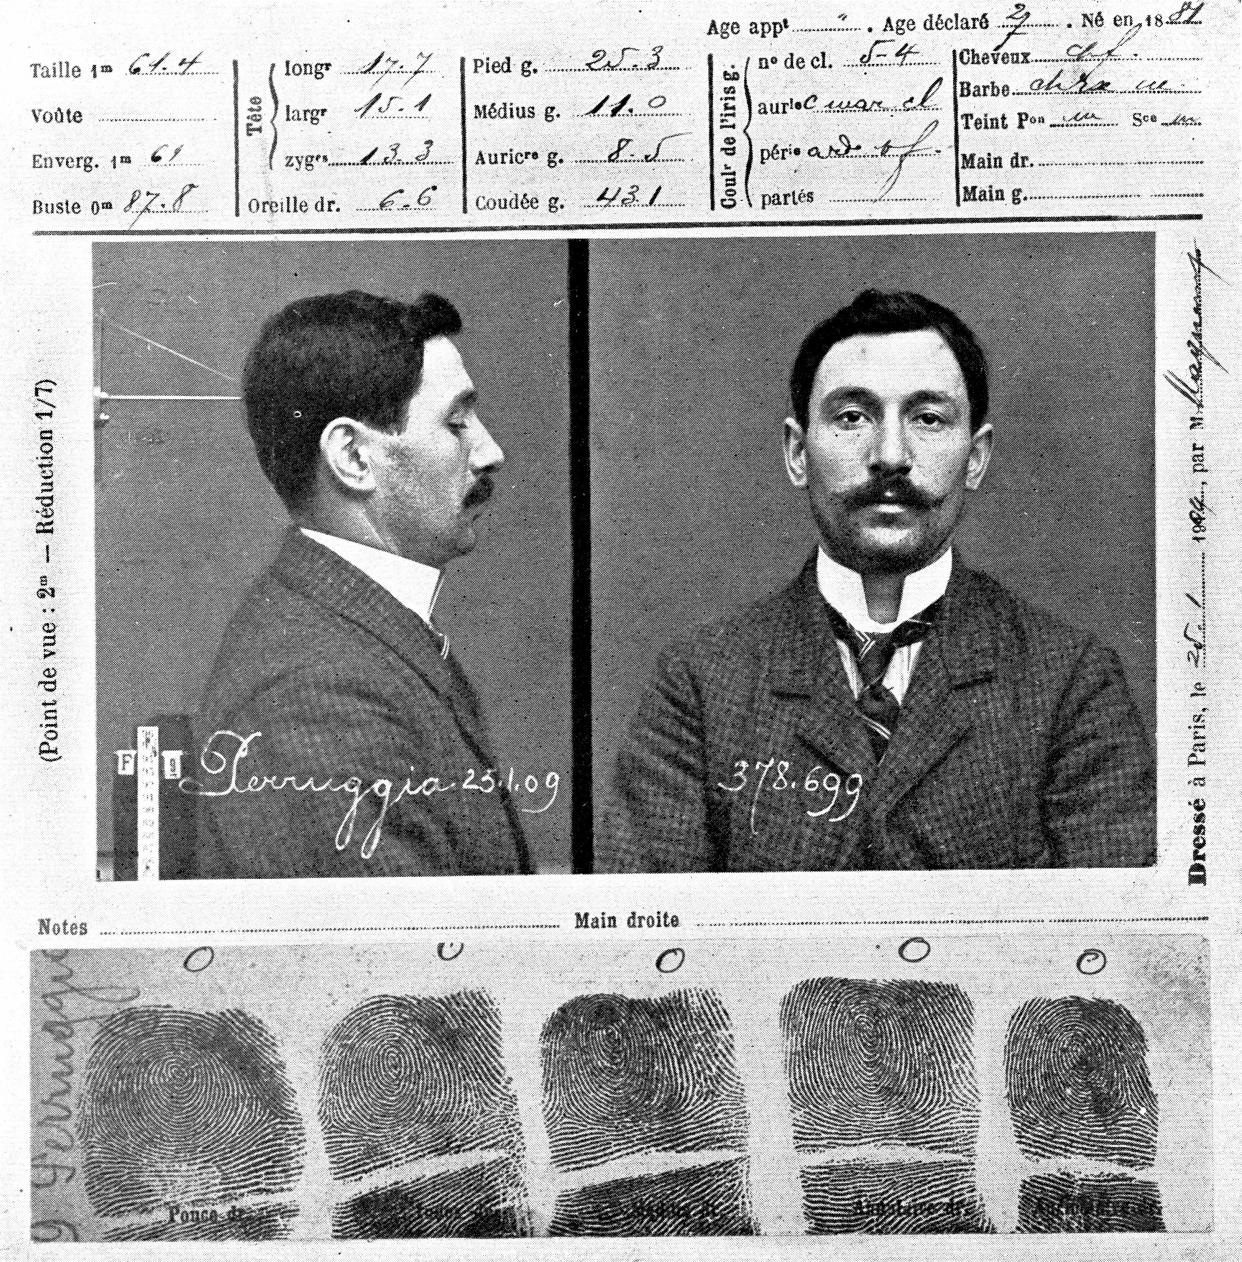 The police record of Vincenzo Peruggia who attempted to steal Leonardo de Vinci's painting 'The Mona Lisa' in 1911, 25th January 1909. (Photo by Roger Viollet via Getty Images)